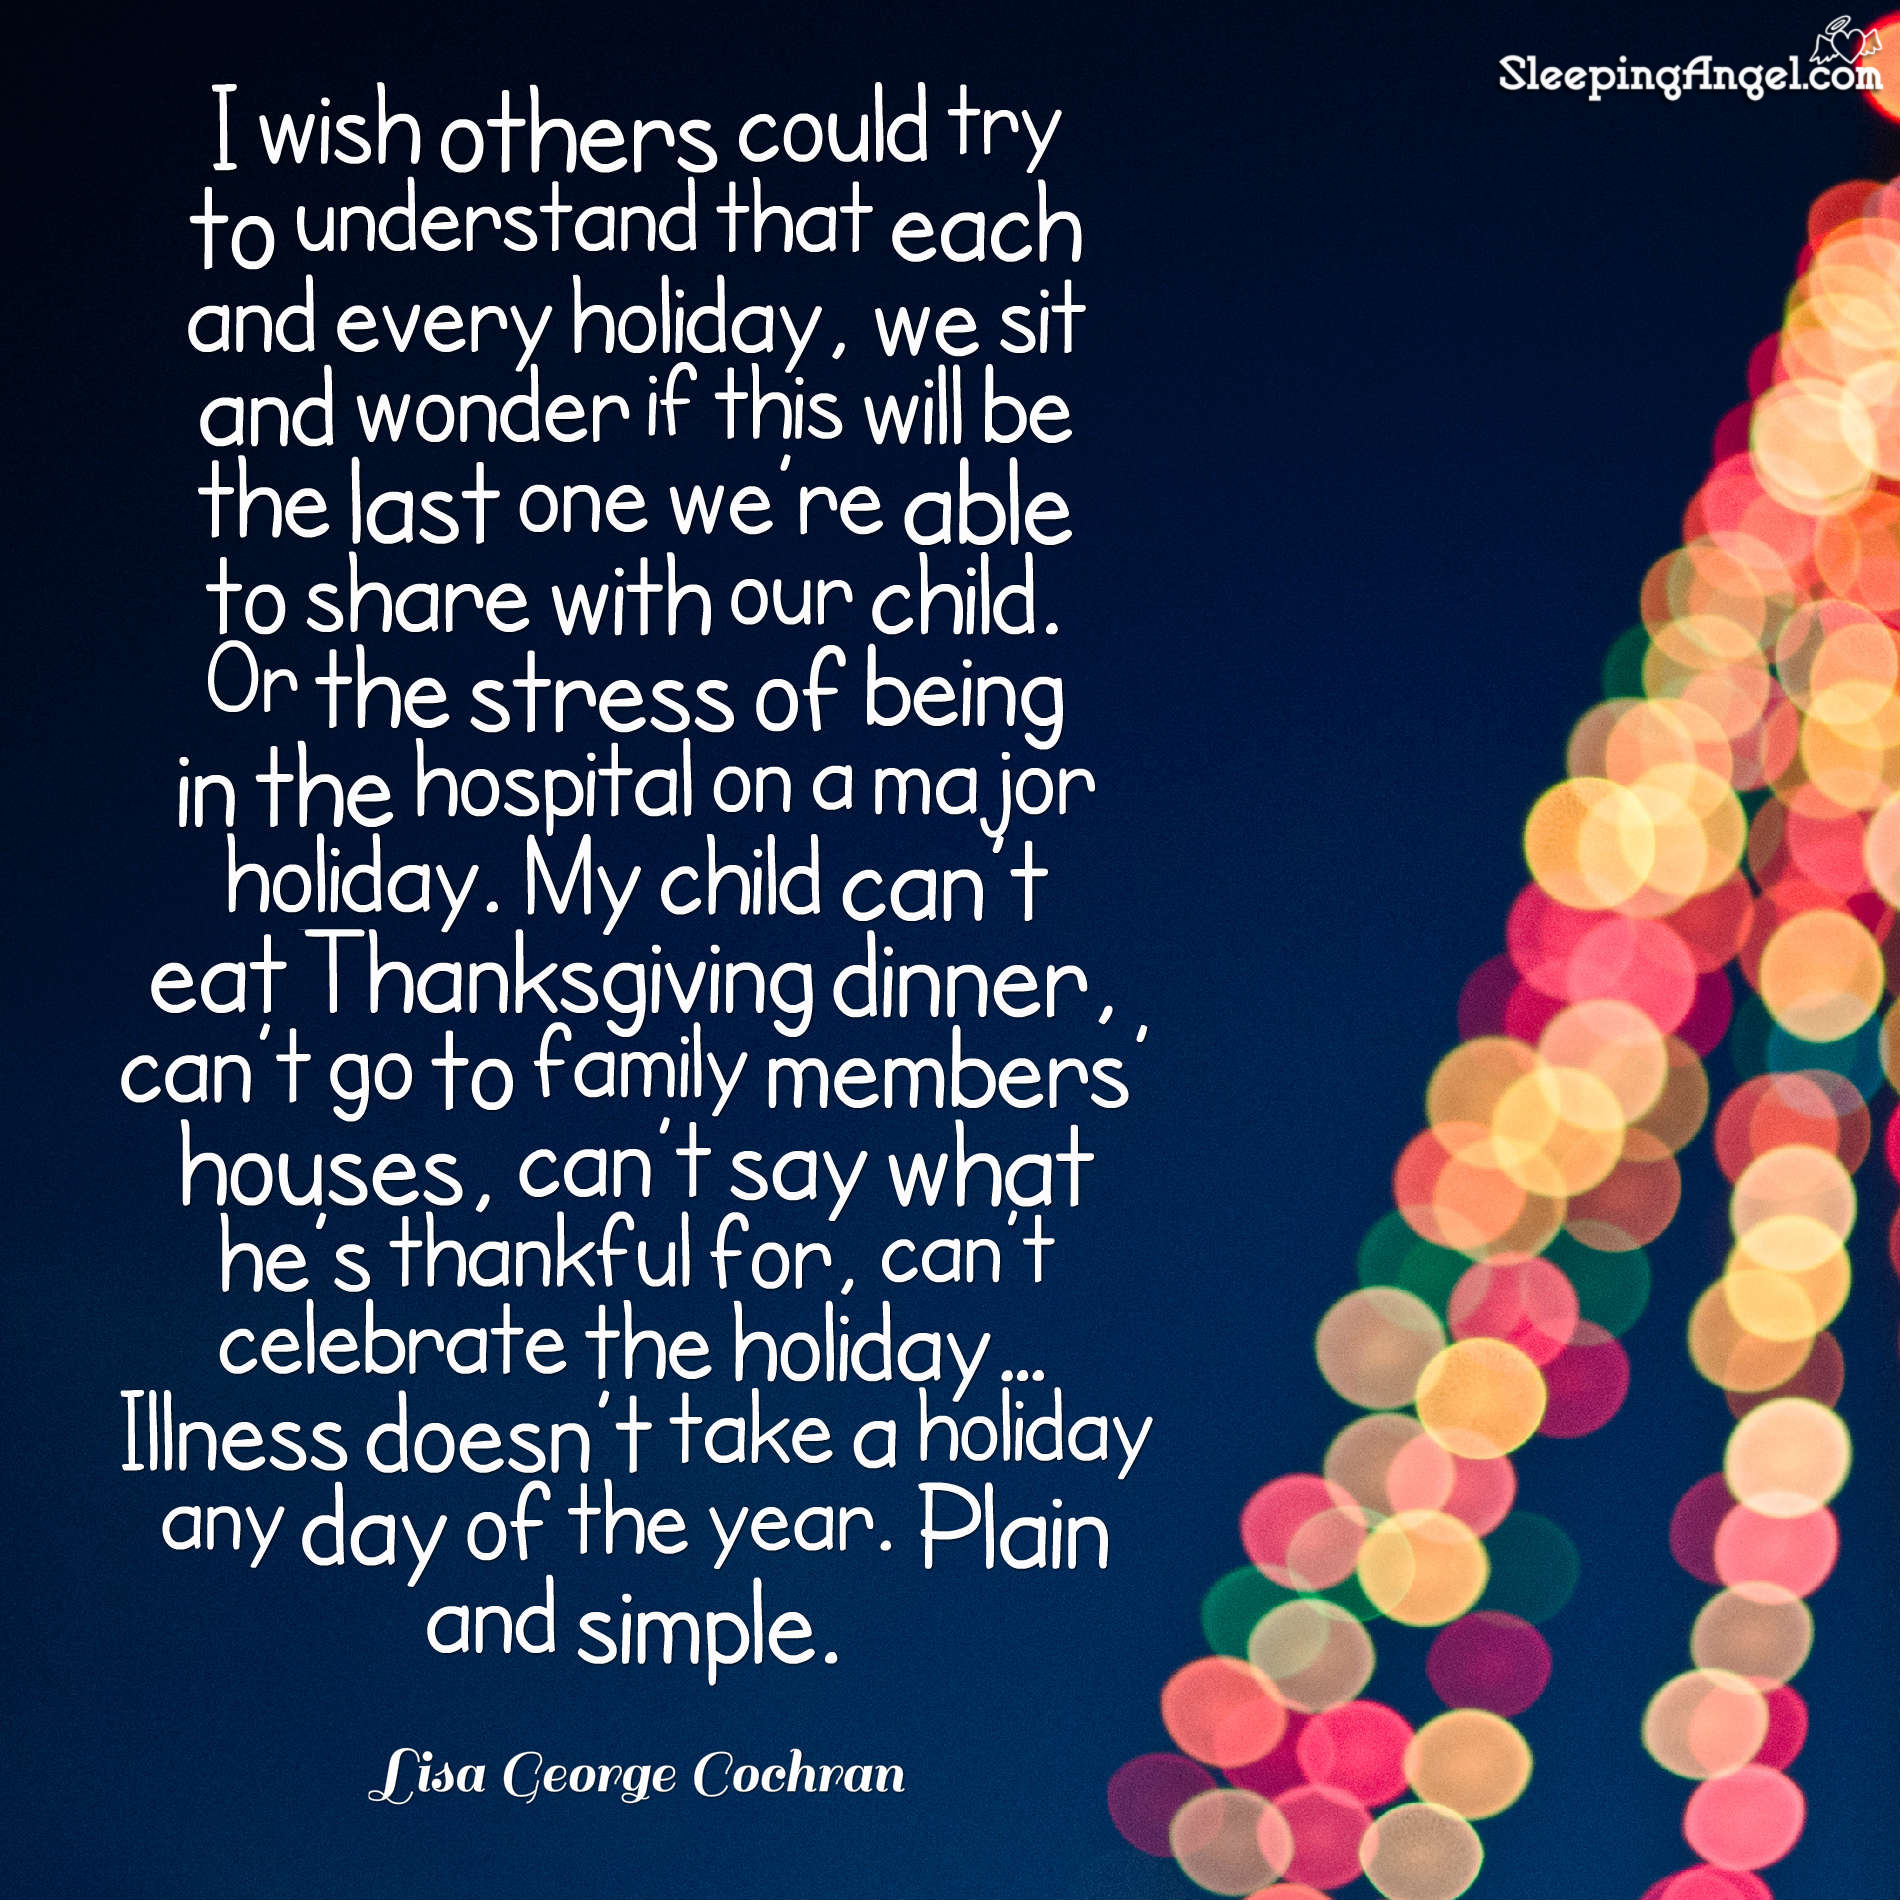 Illness Doesn’t Take a Holiday Quote